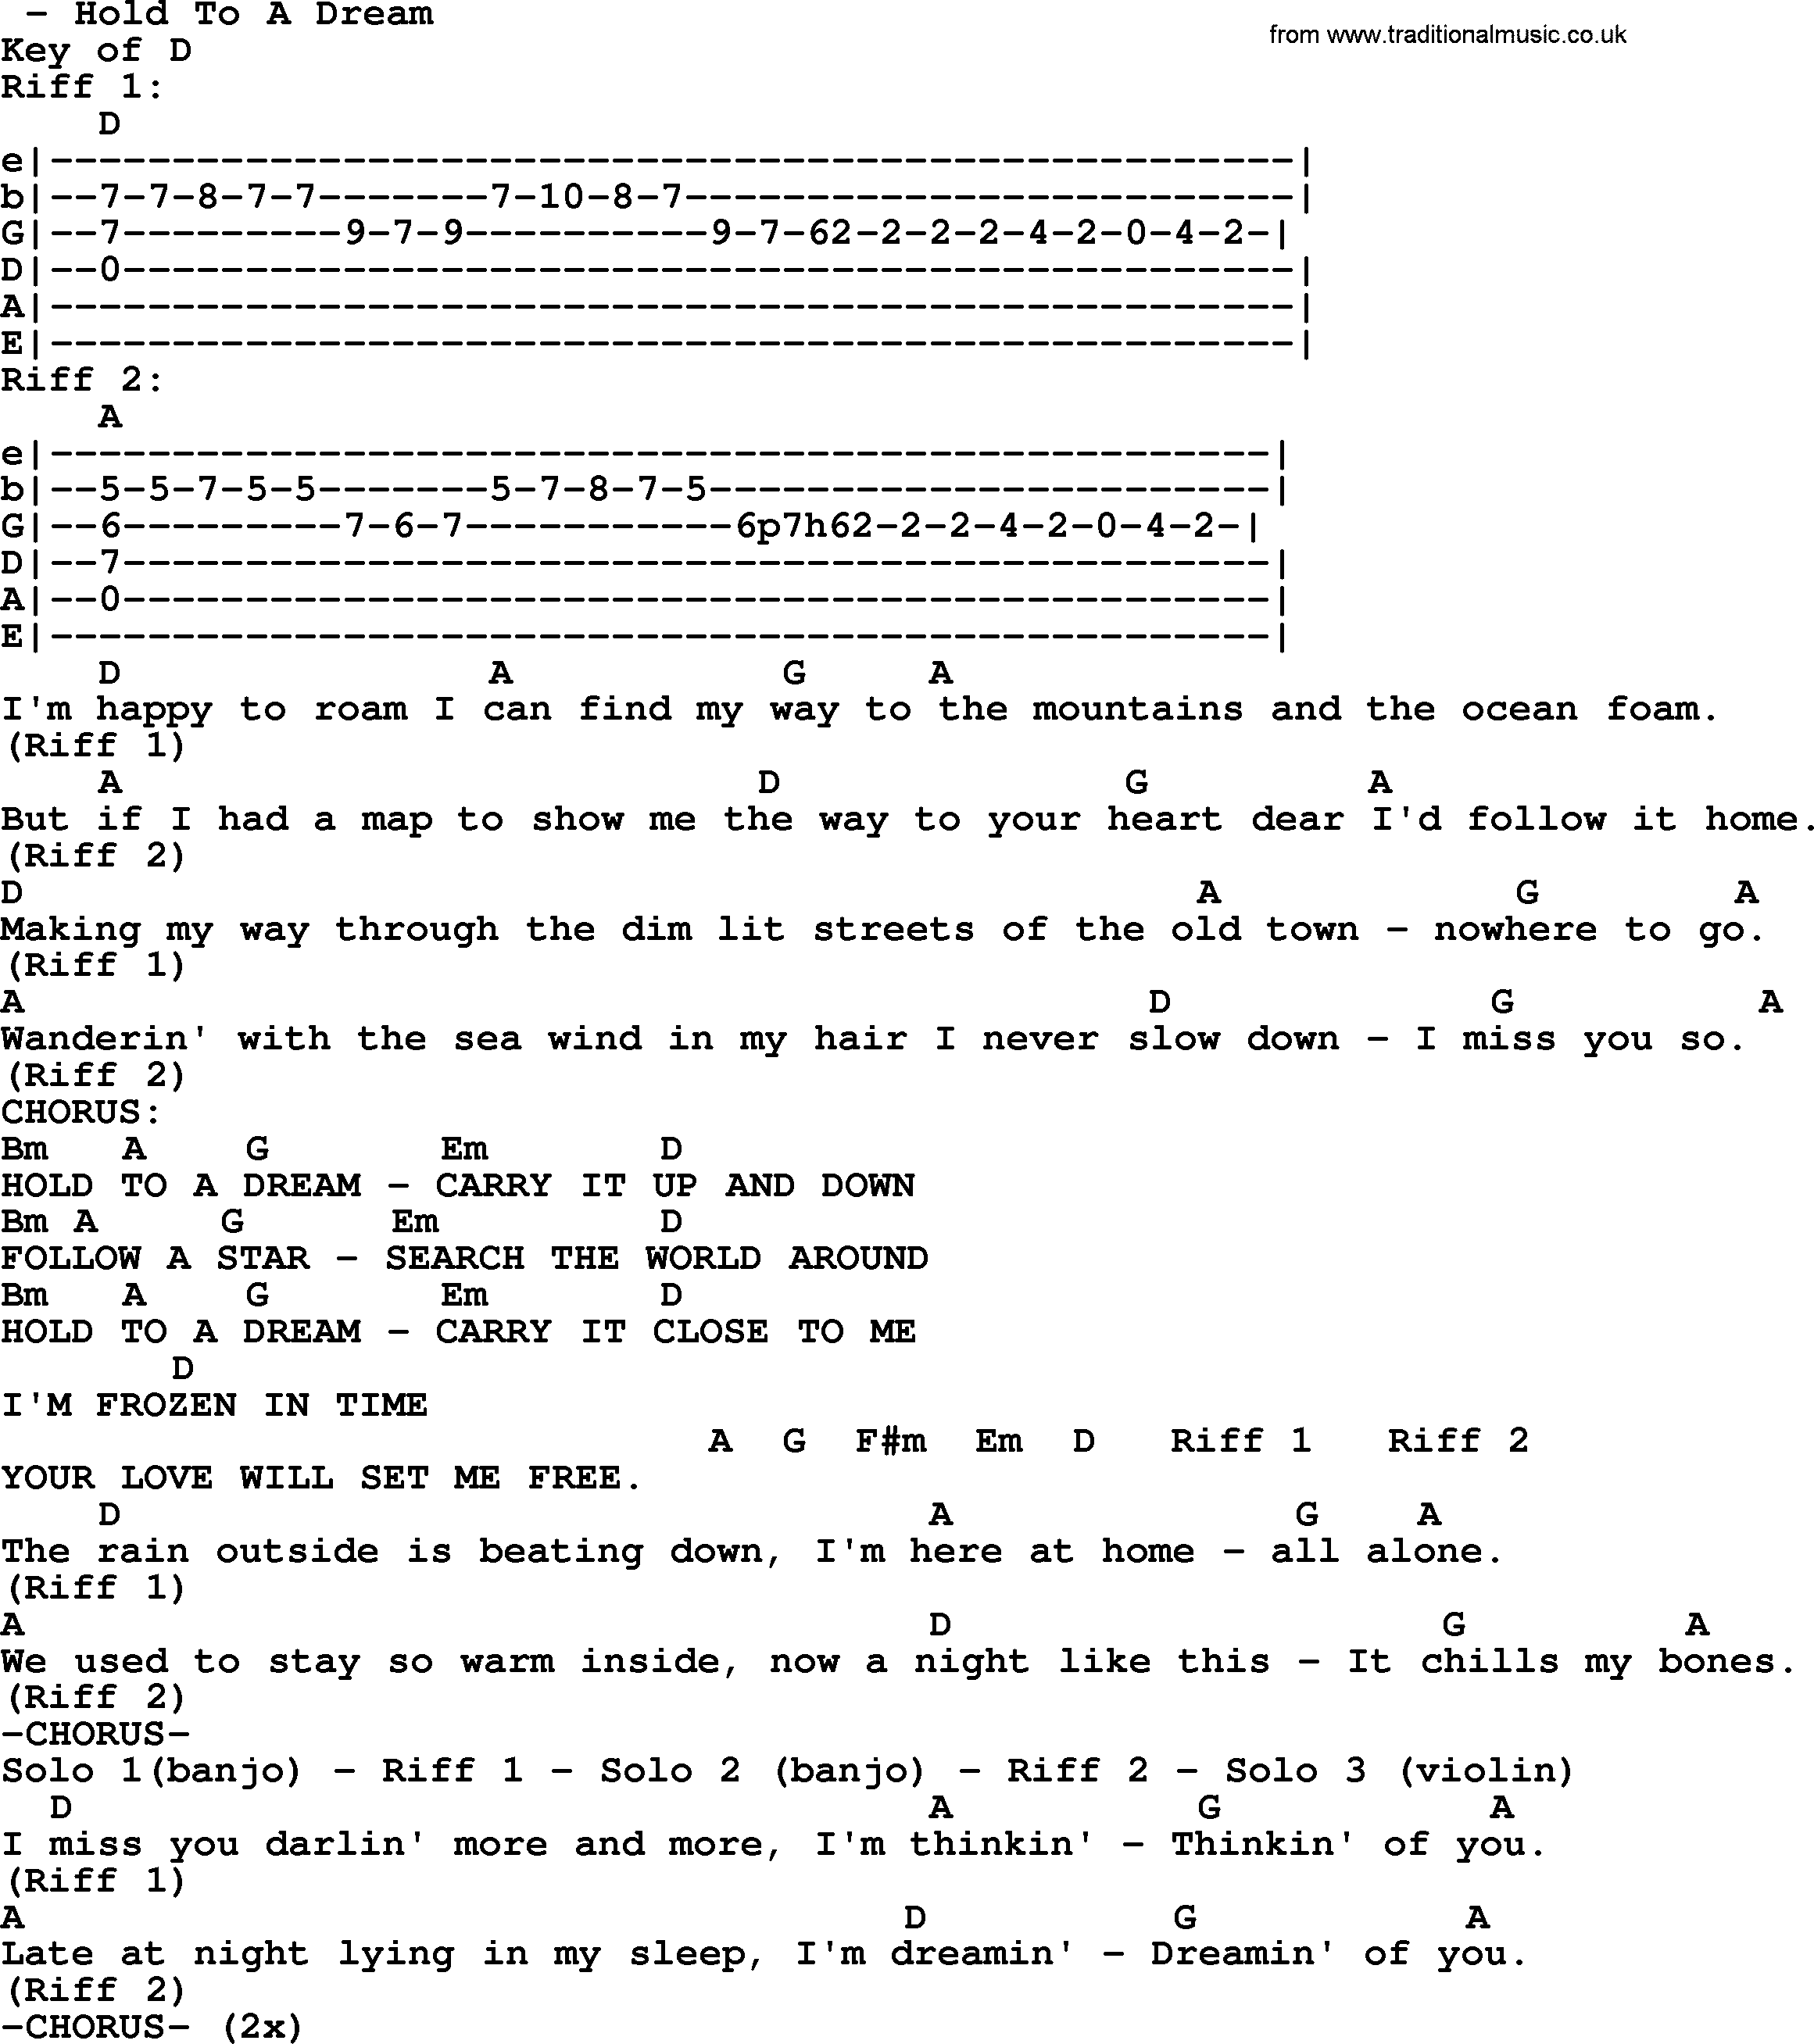 Bluegrass song: Hold To A Dream, lyrics and chords